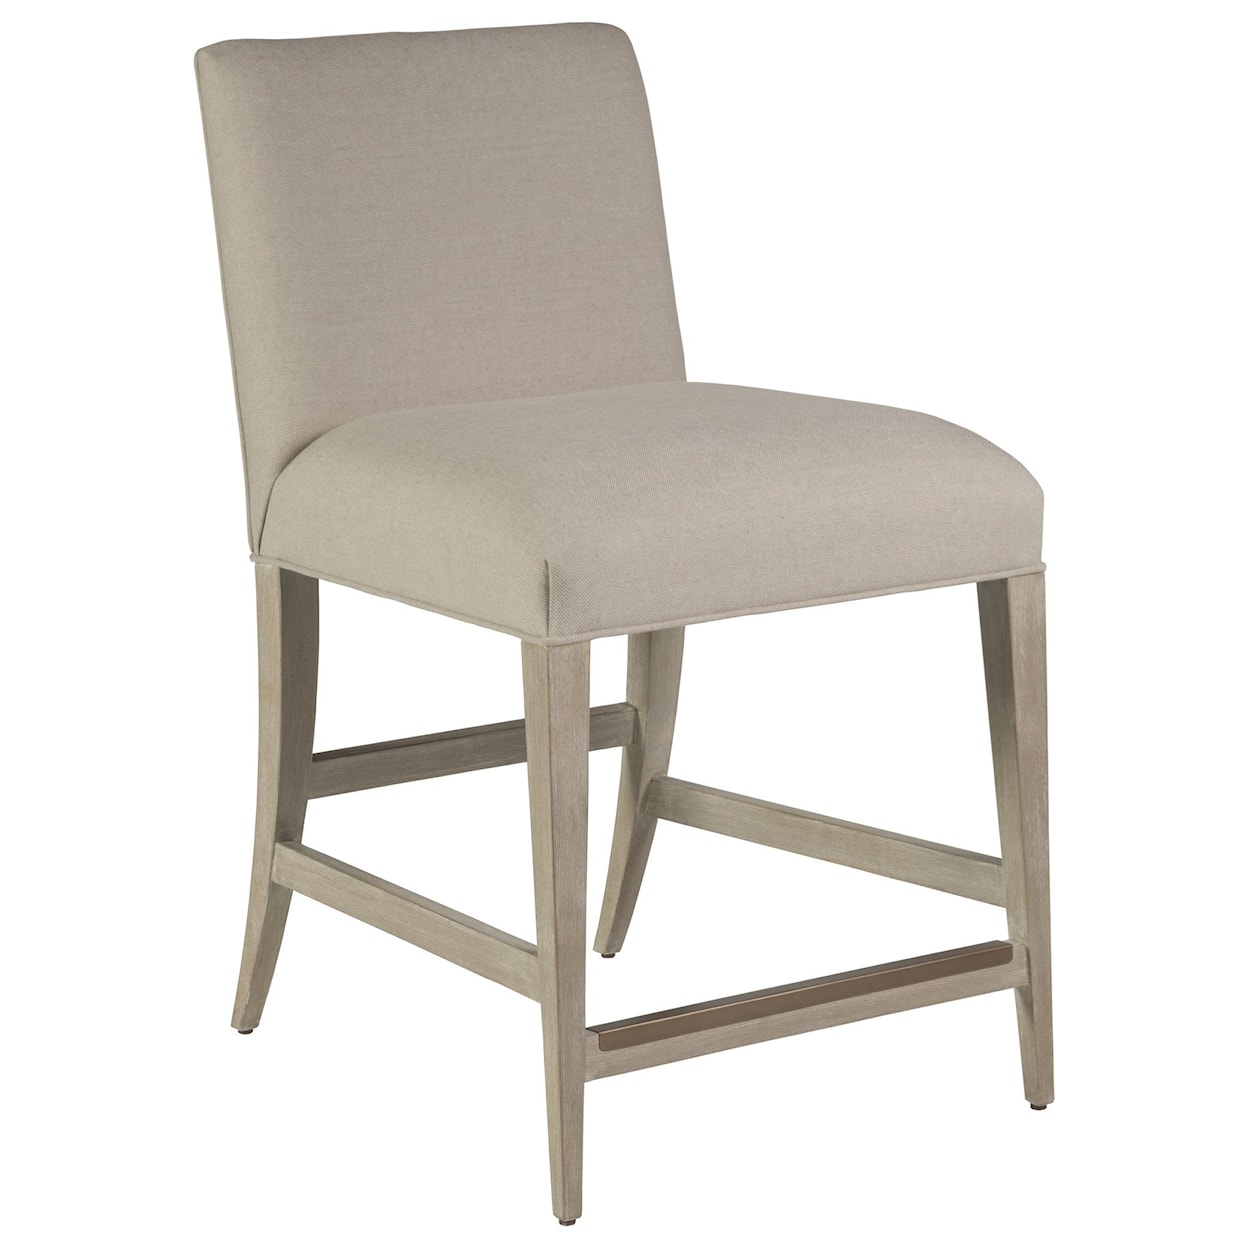 Artistica Cohesion Madox Upholstered Low Back Counter Stool